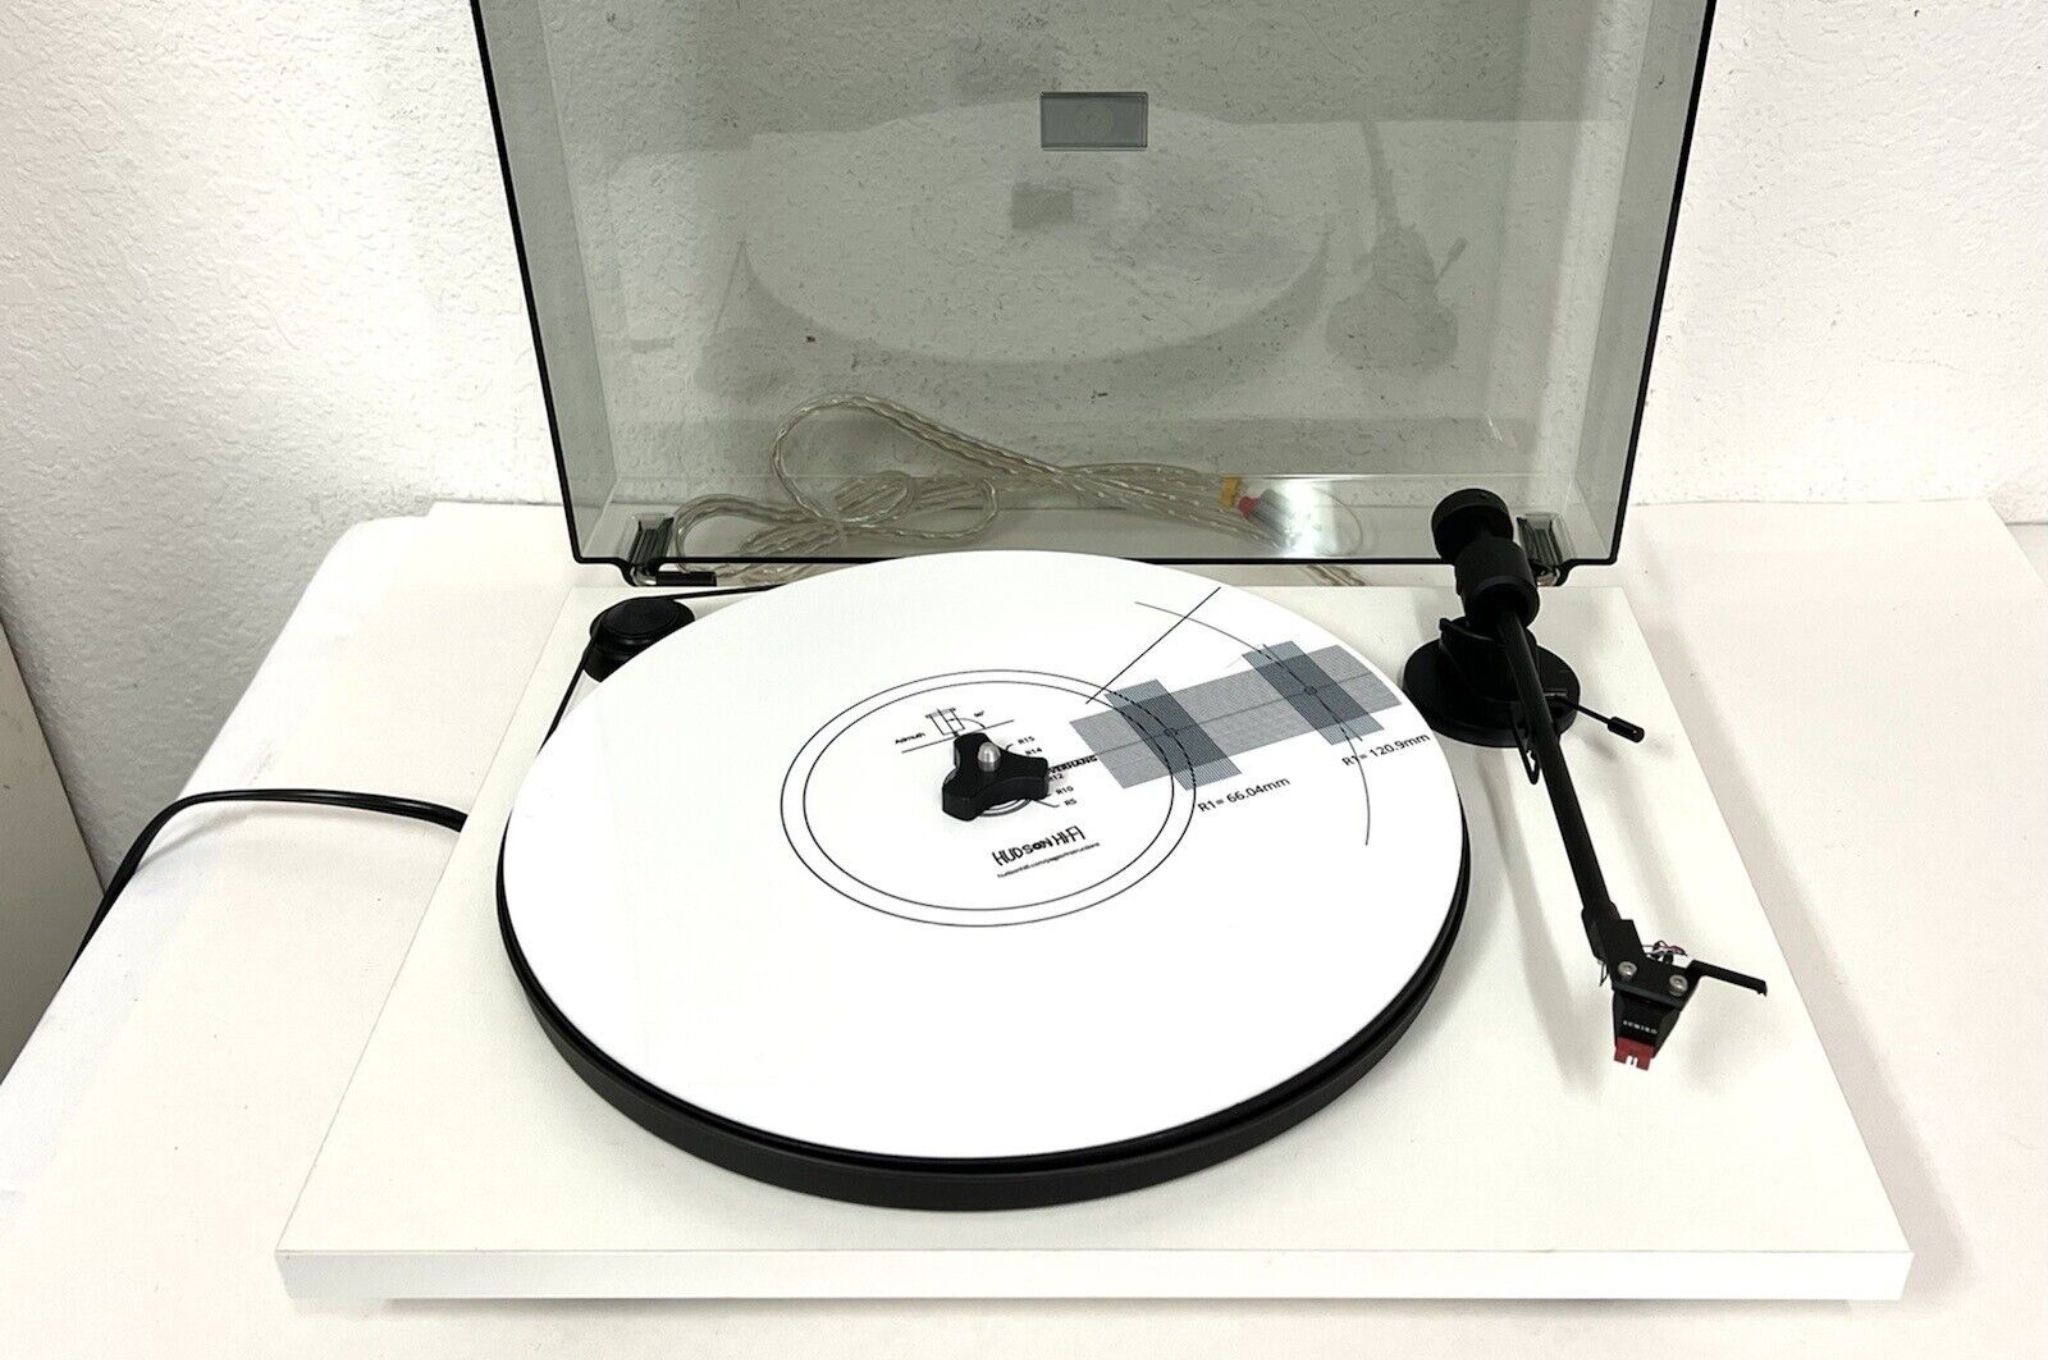 A white Andover Audio SpinDeck turntable